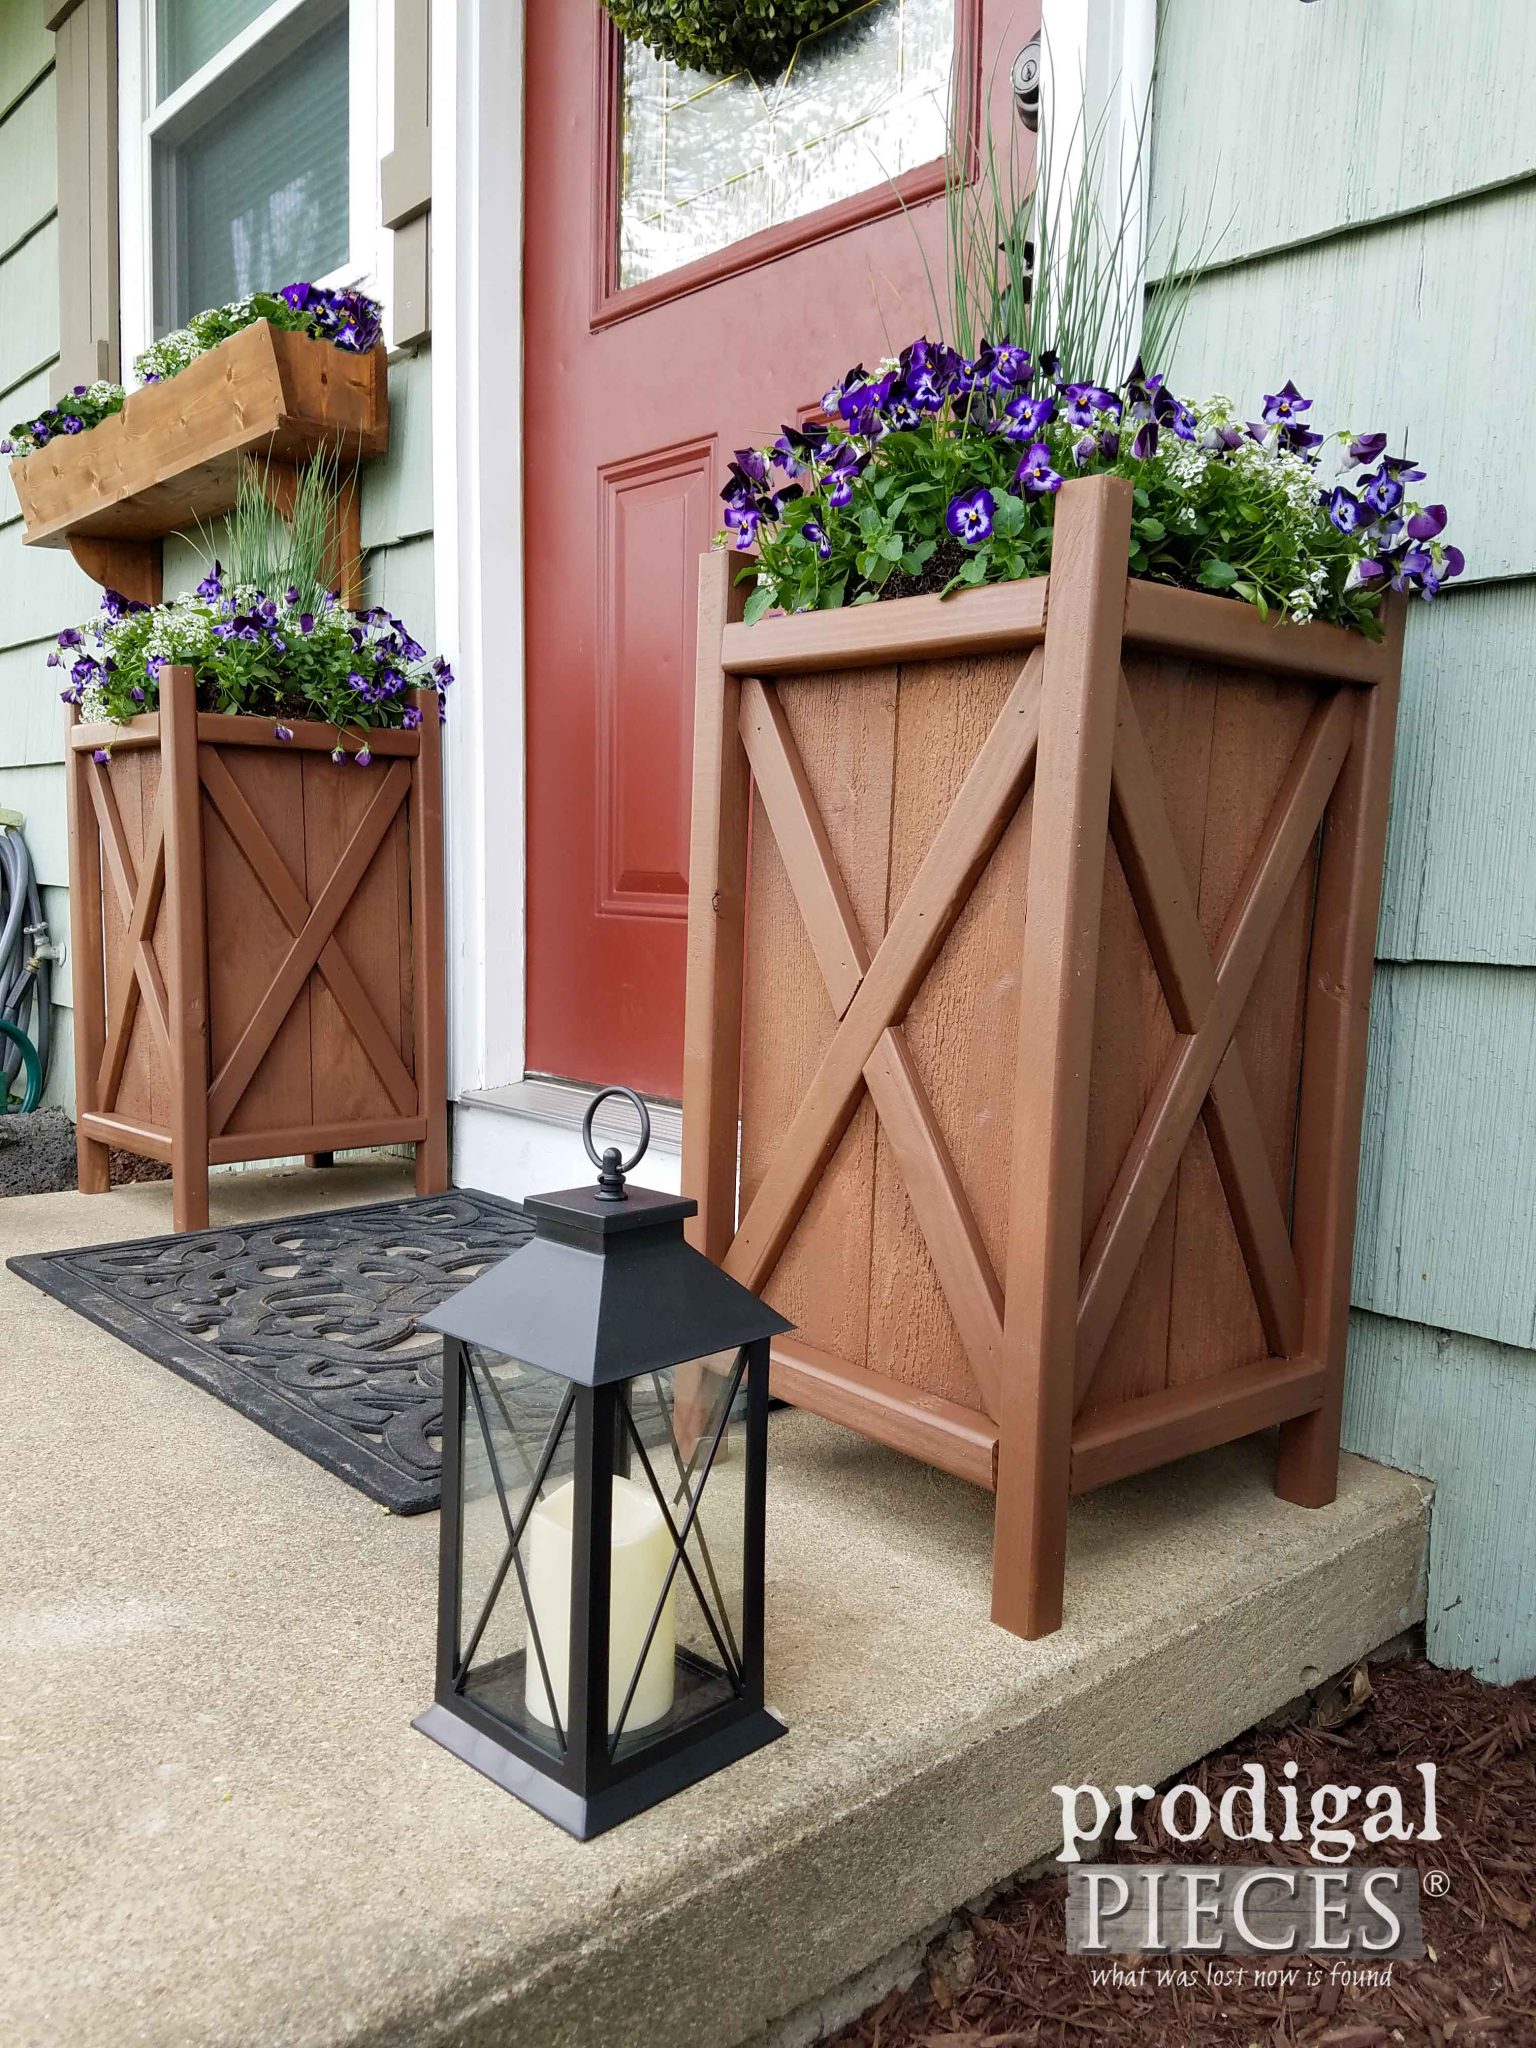 Add Curb Appeal with Planters - Tutorial by Prodigal Pieces | prodigalpieces.com